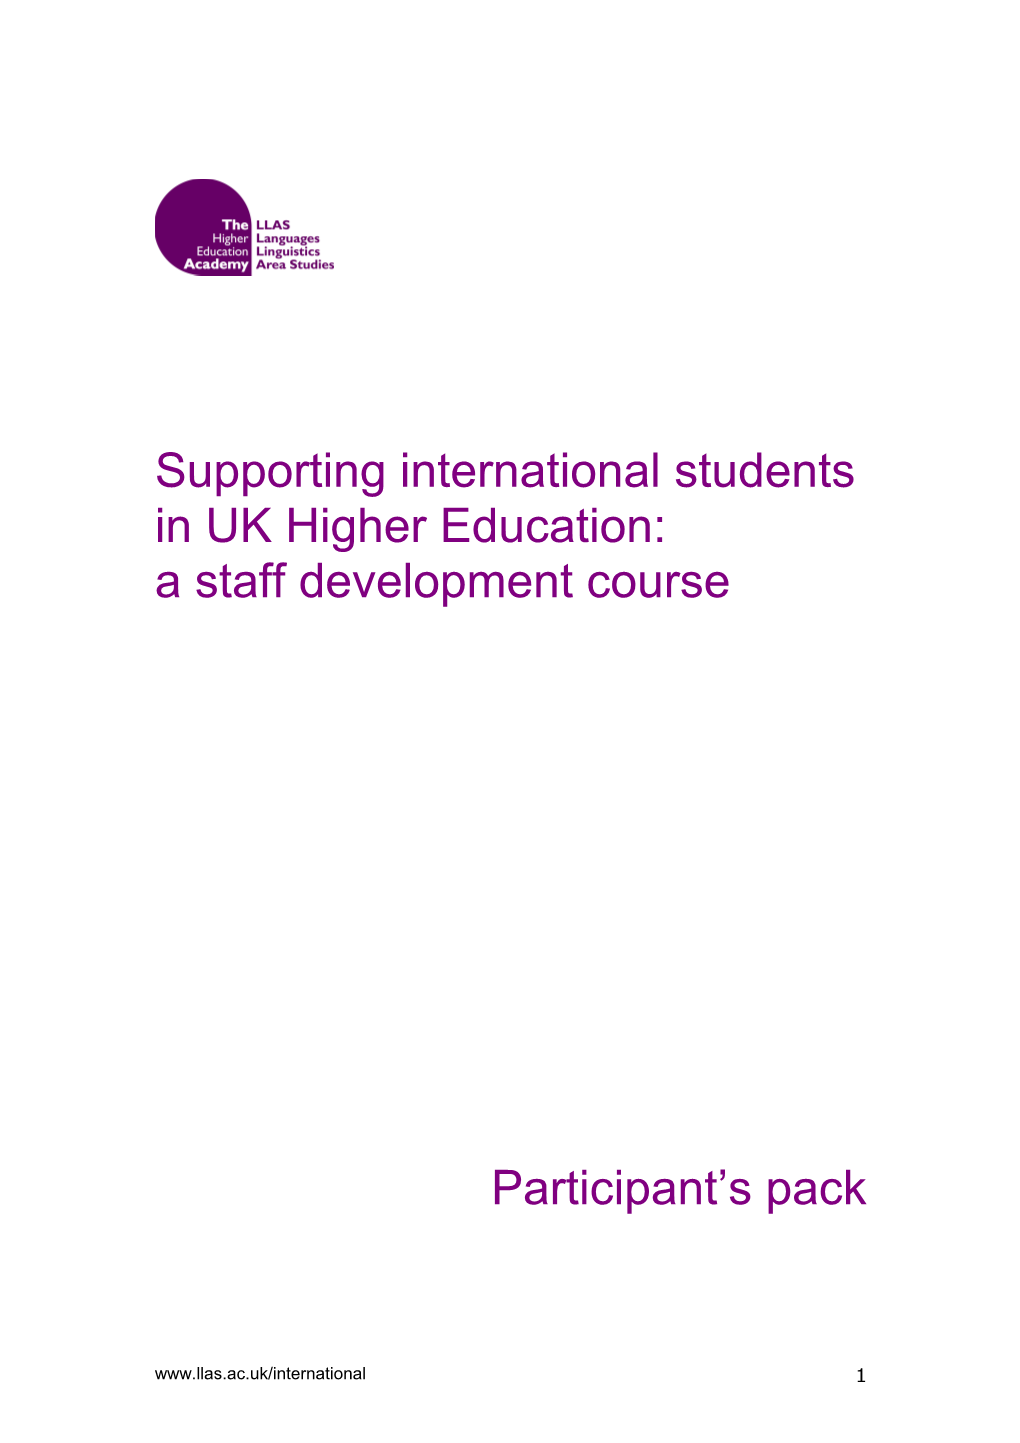 Supporting International Students in UK Higher Education